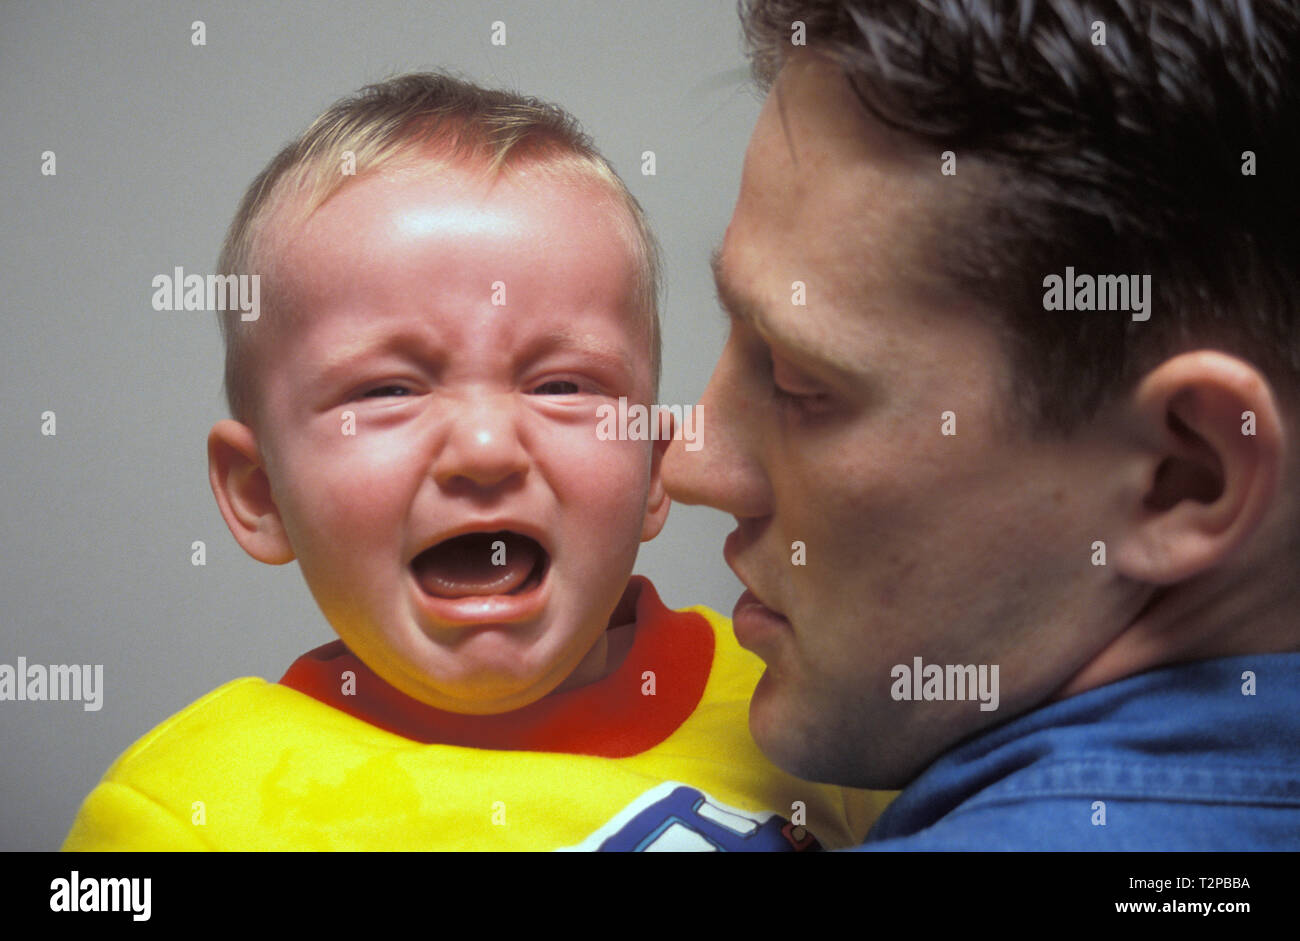 father holding screaming baby boy Stock Photo